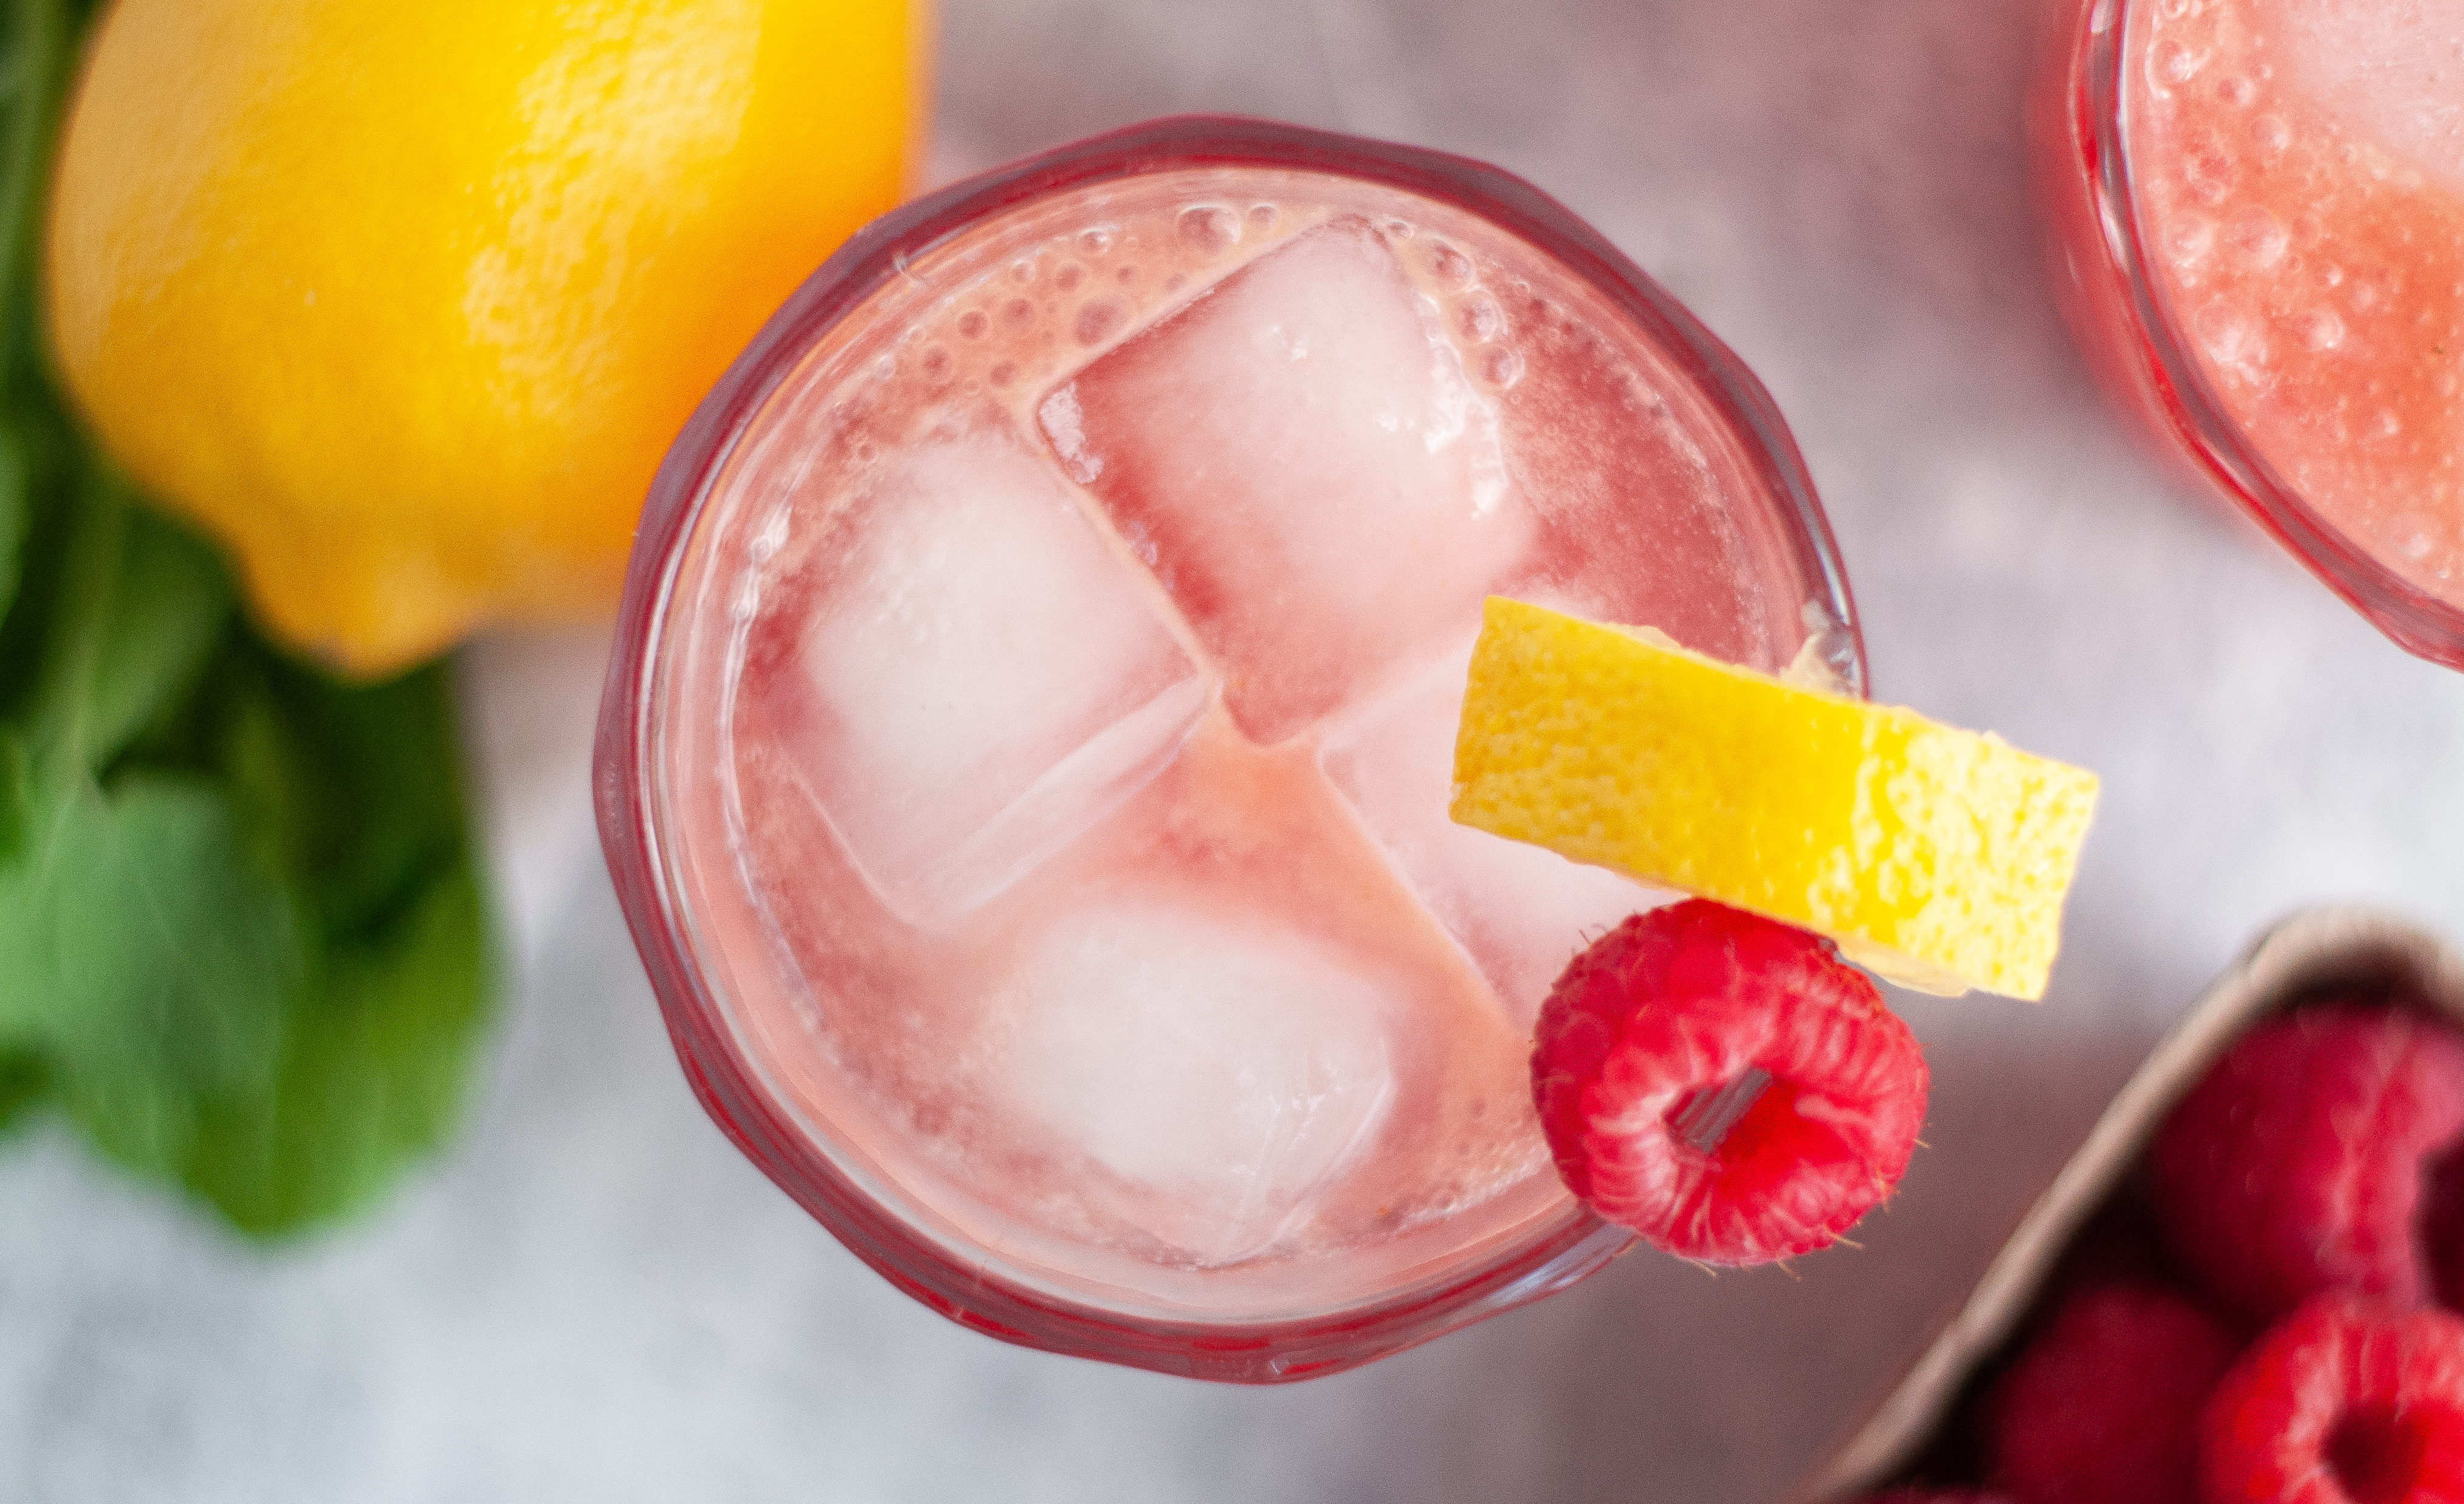 Top down view of a raspberry bourbon smash cocktail, garnished with a lemon wedge and raspberry. Surrounded by additional ingredients.